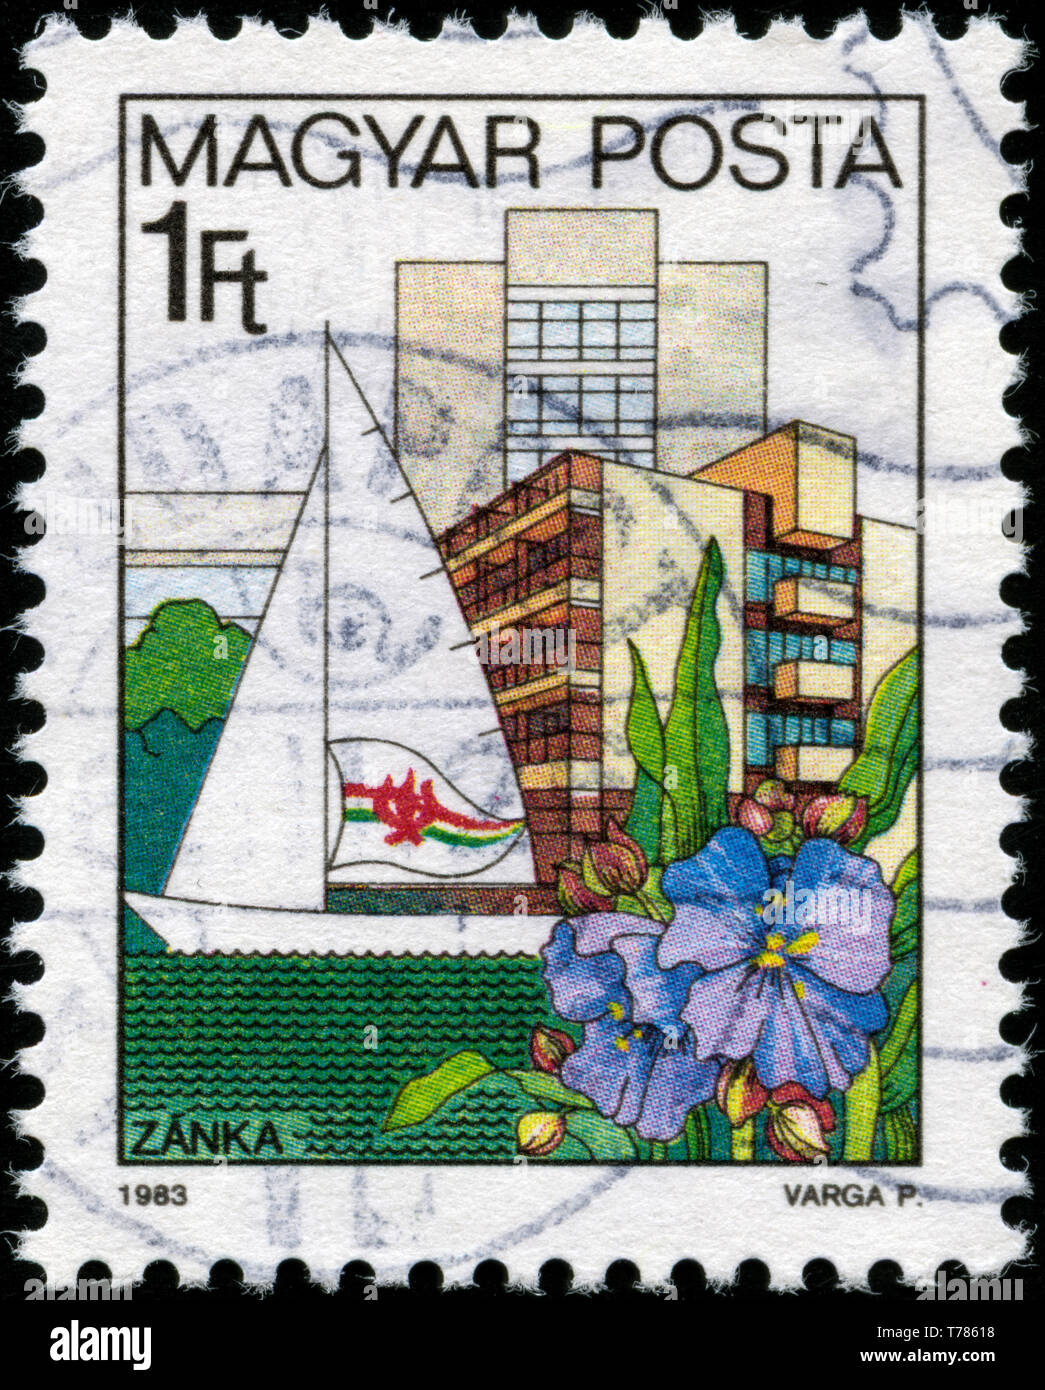 Postage stamp from Hungary in the Resorts series issued in 1983 Stock Photo